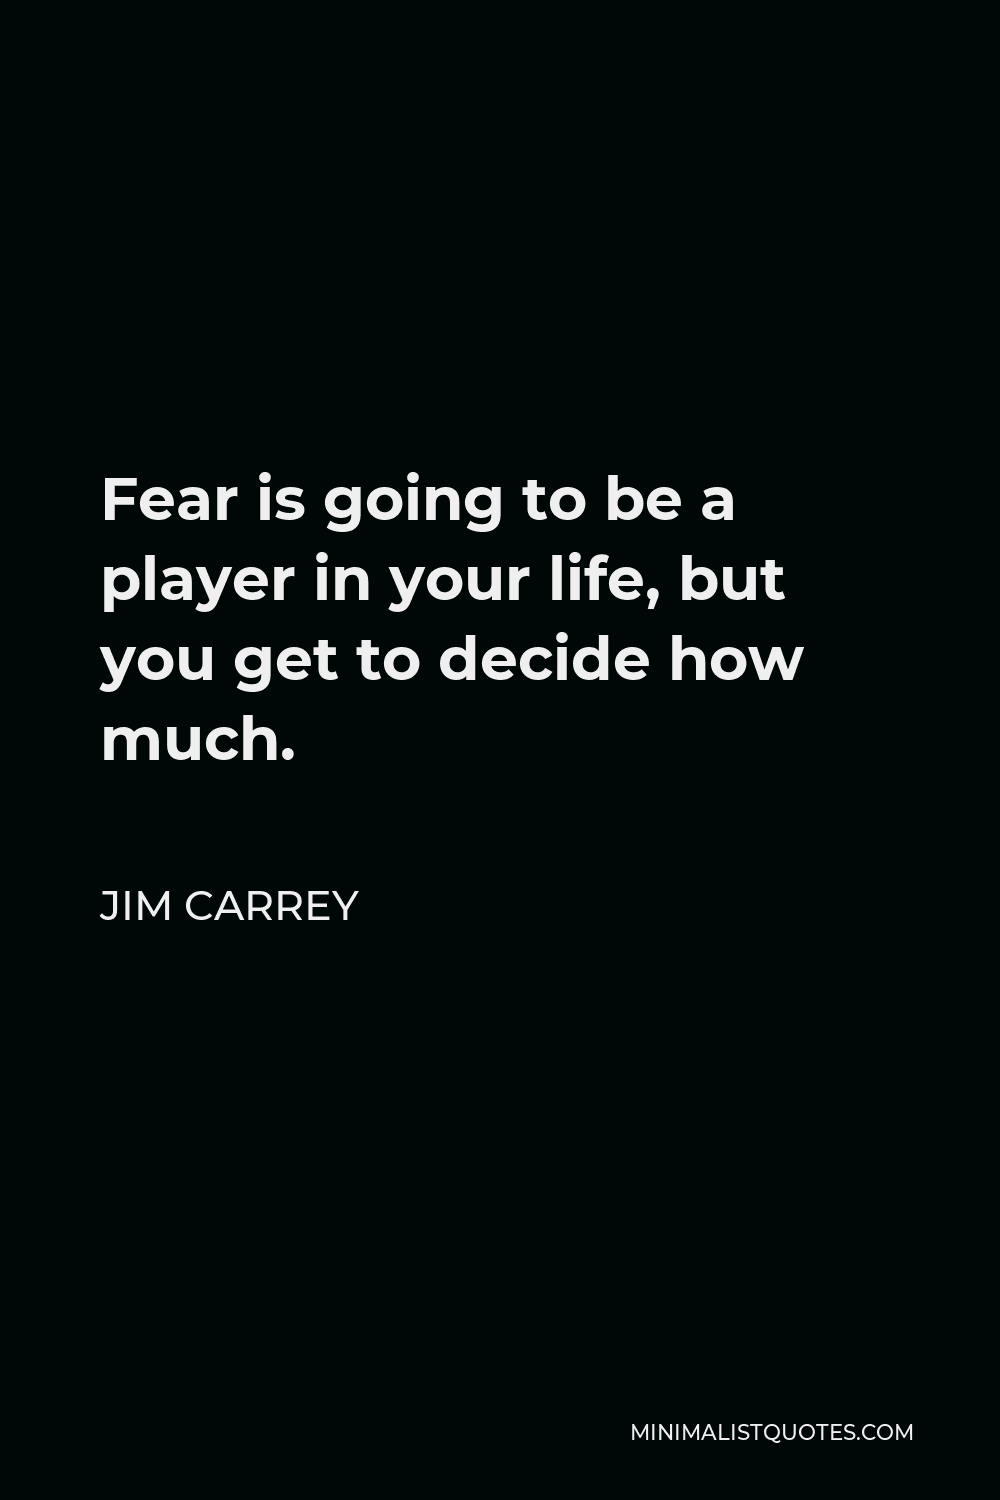 Jim Carrey Quote - Fear is going to be a player in your life, but you get to decide how much.